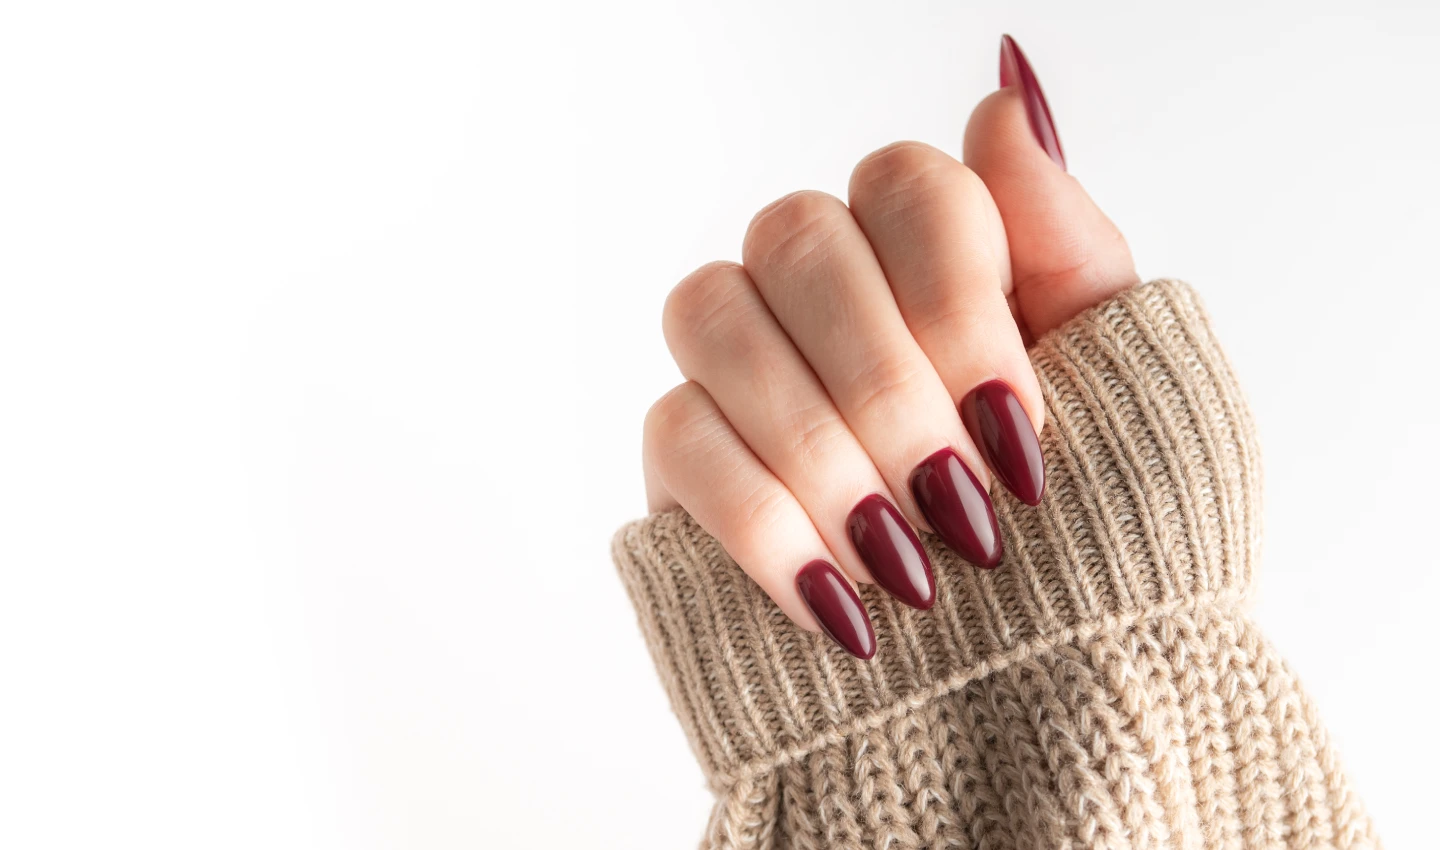 A close-up image of a hand with perfectly polished nails using nail extensions, highlighting the world of glamorous nail transformations.